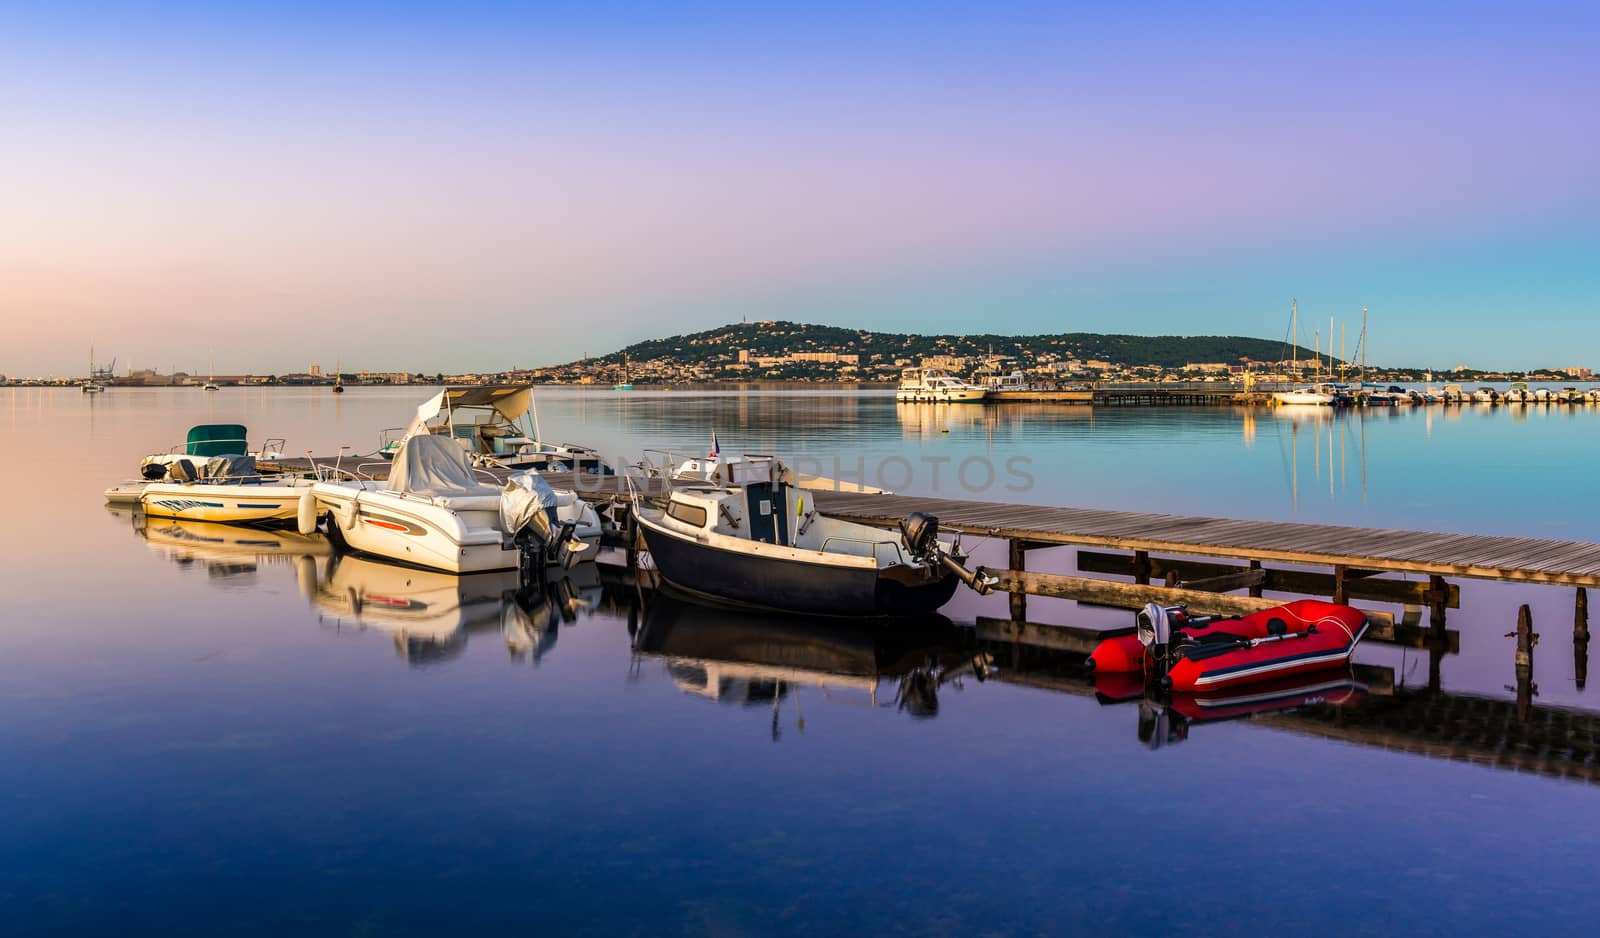 A very calm and peaceful morning on the Etang de Thau, from the spa resort of Balaruc-les-Bains in Herault in the Occitania region in the south of France.